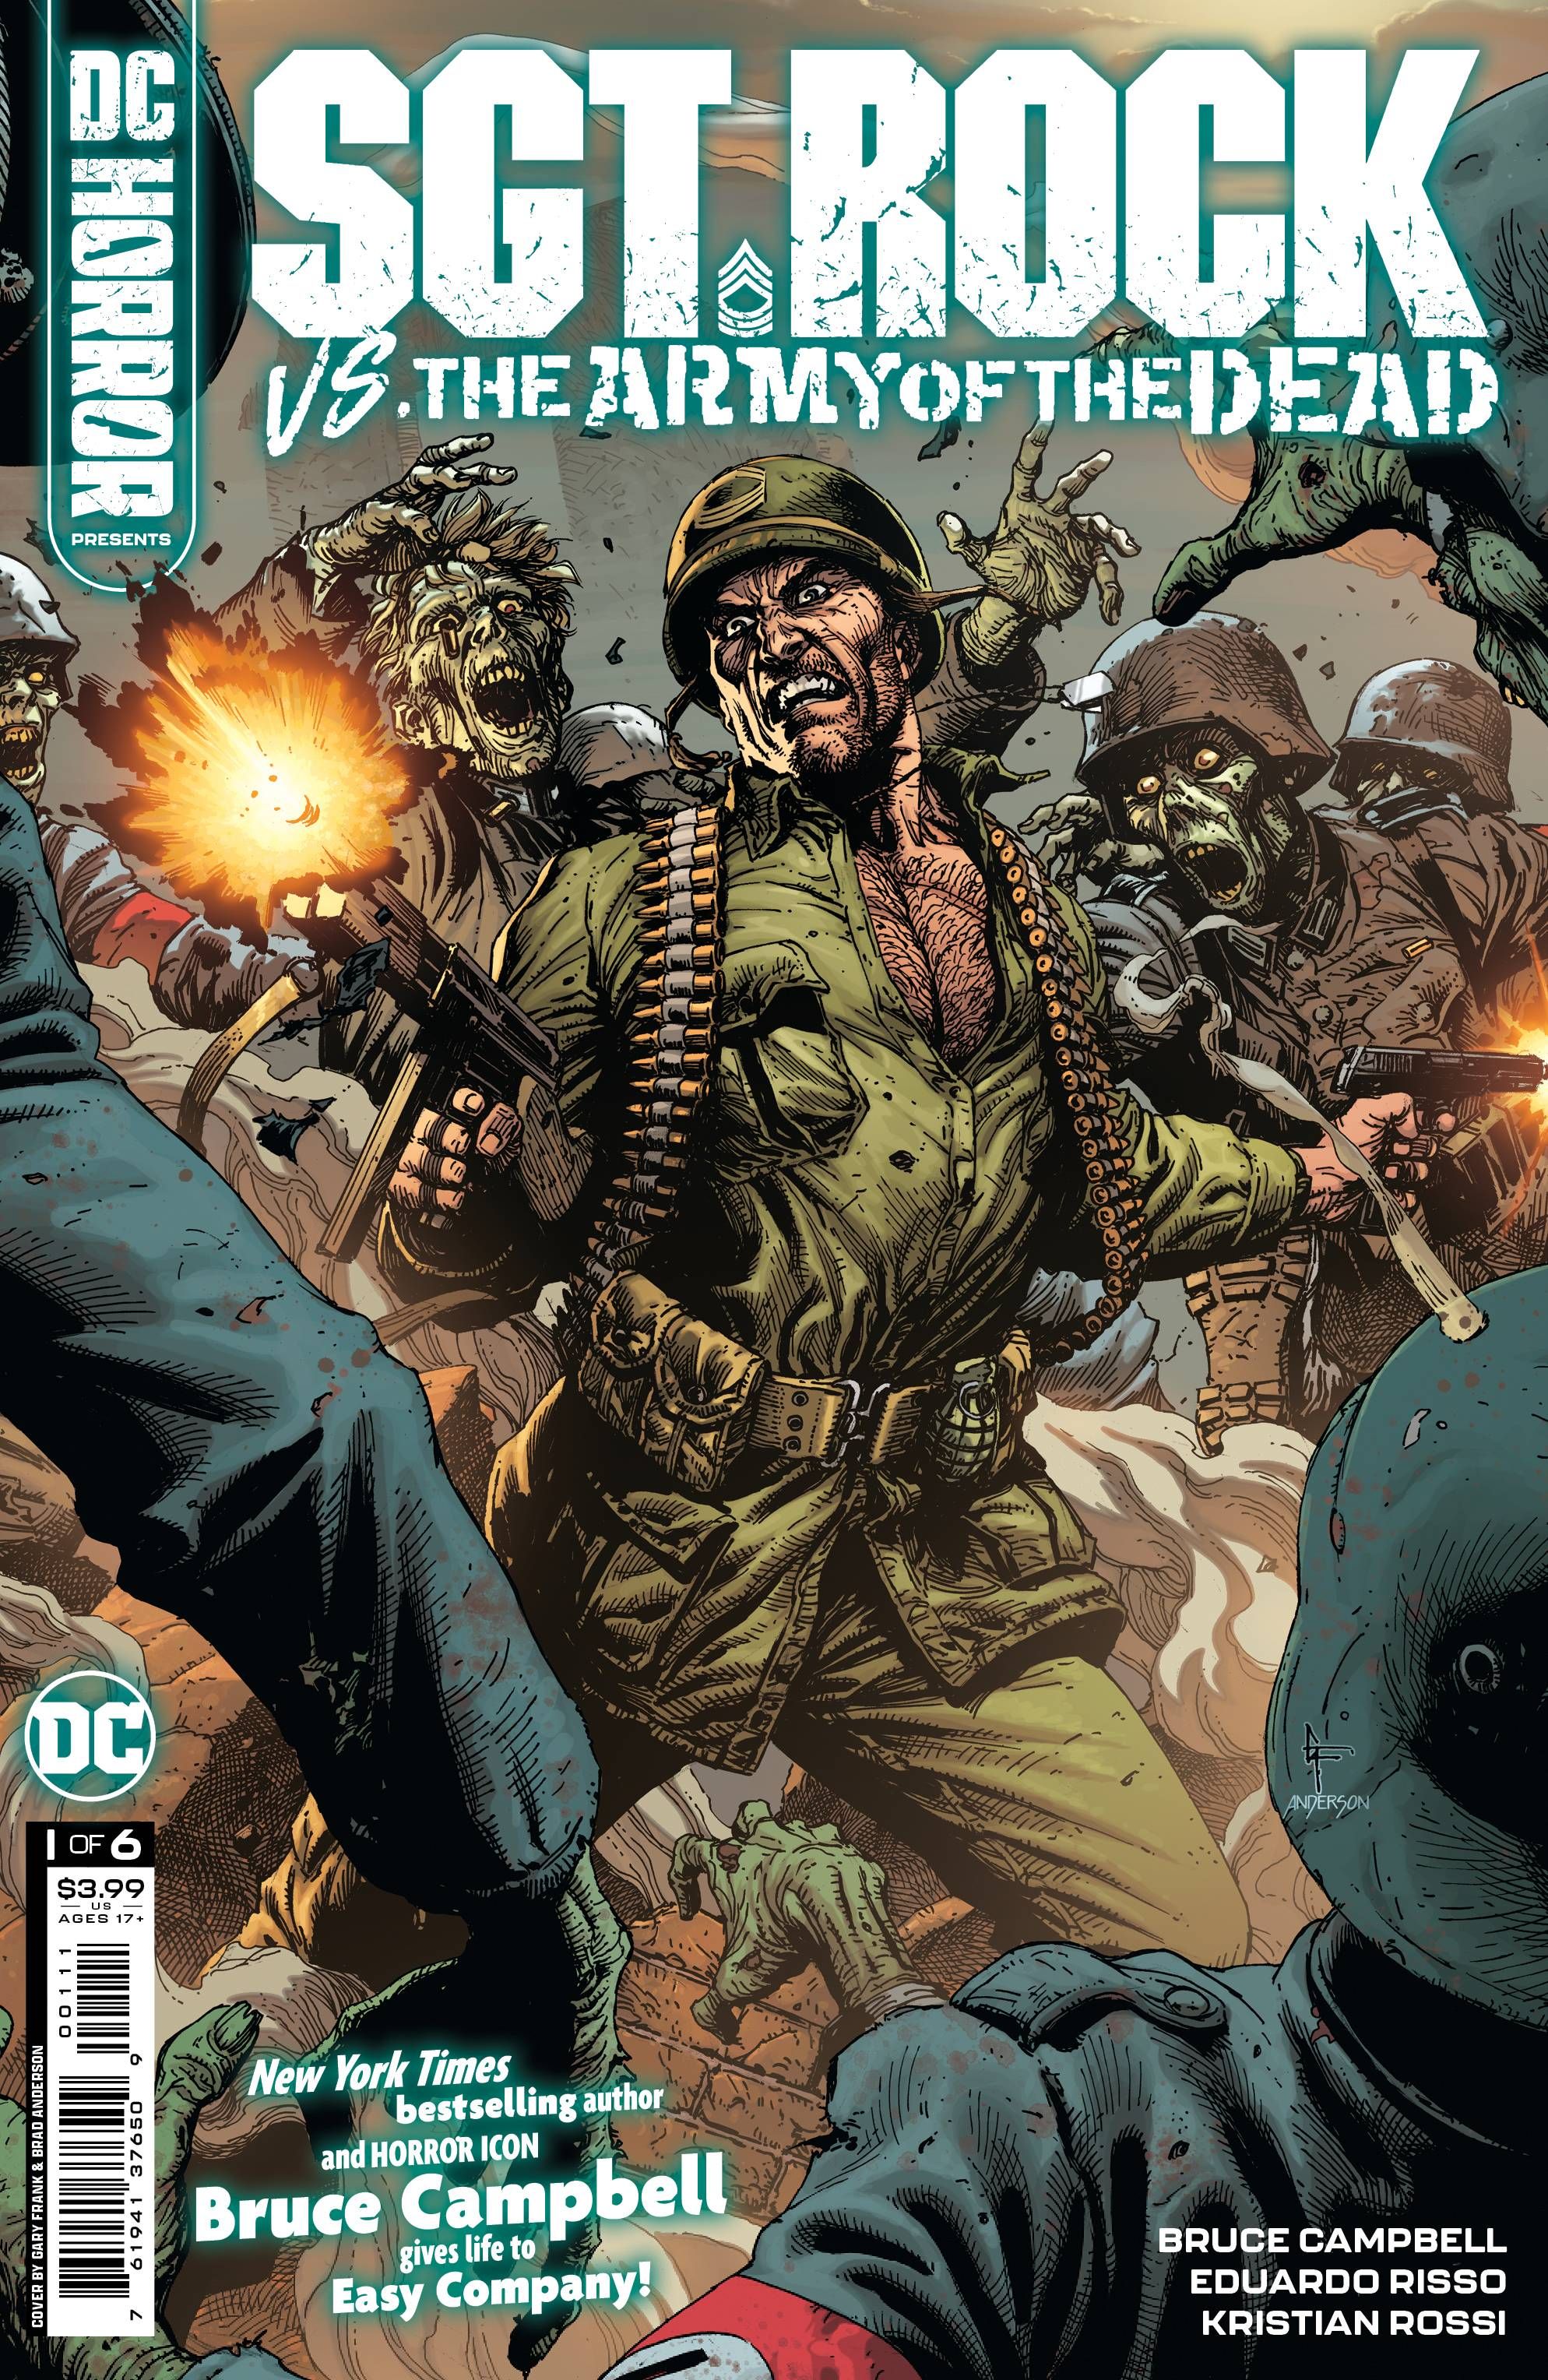 DC Horror Presents Sgt. Rock vs The Army of the Dead #1